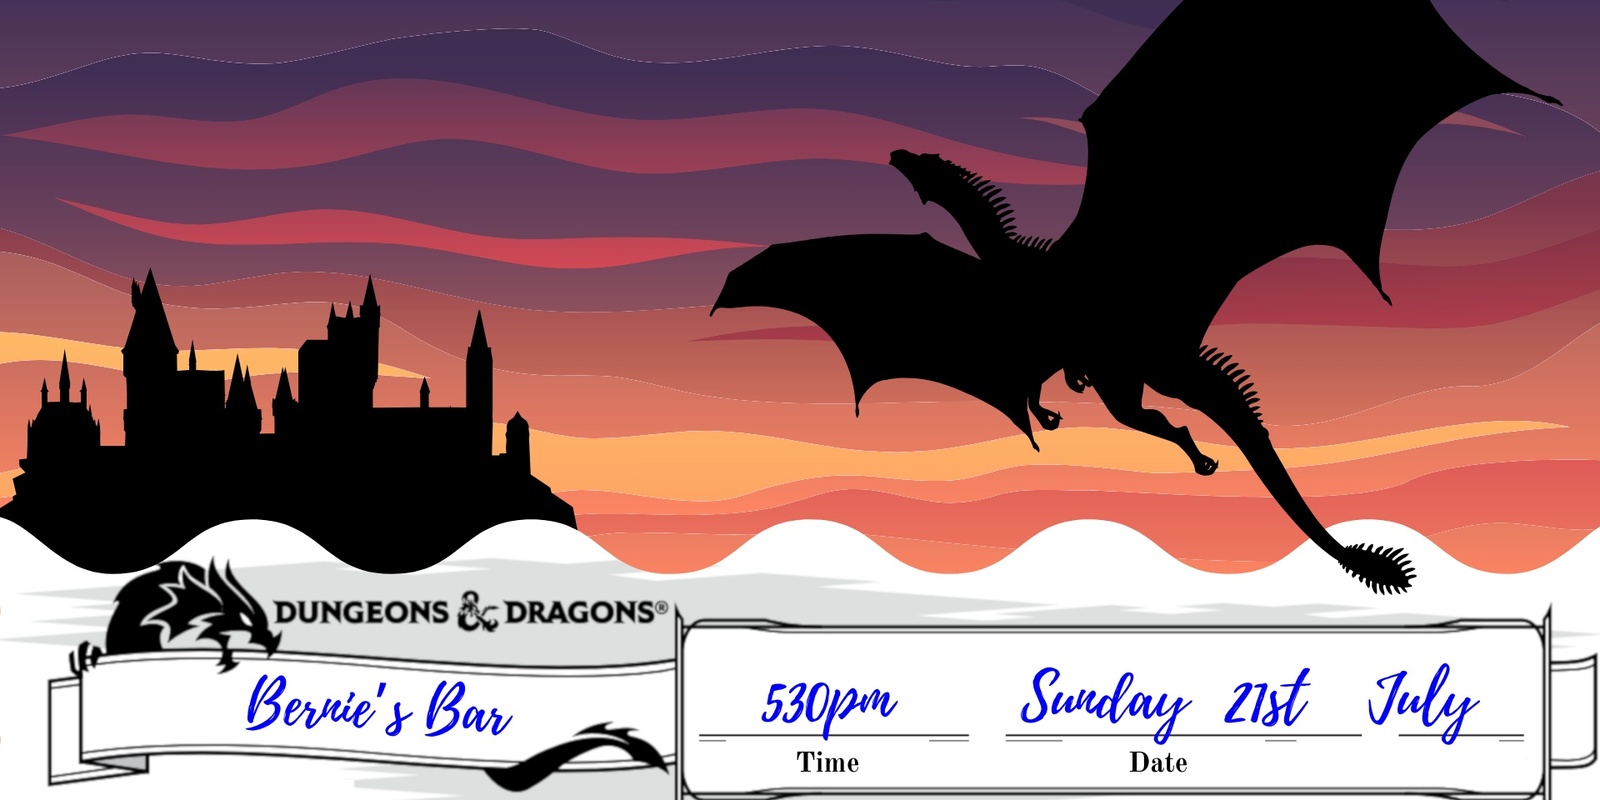 Banner image for D&D Night at Bernie's Bar